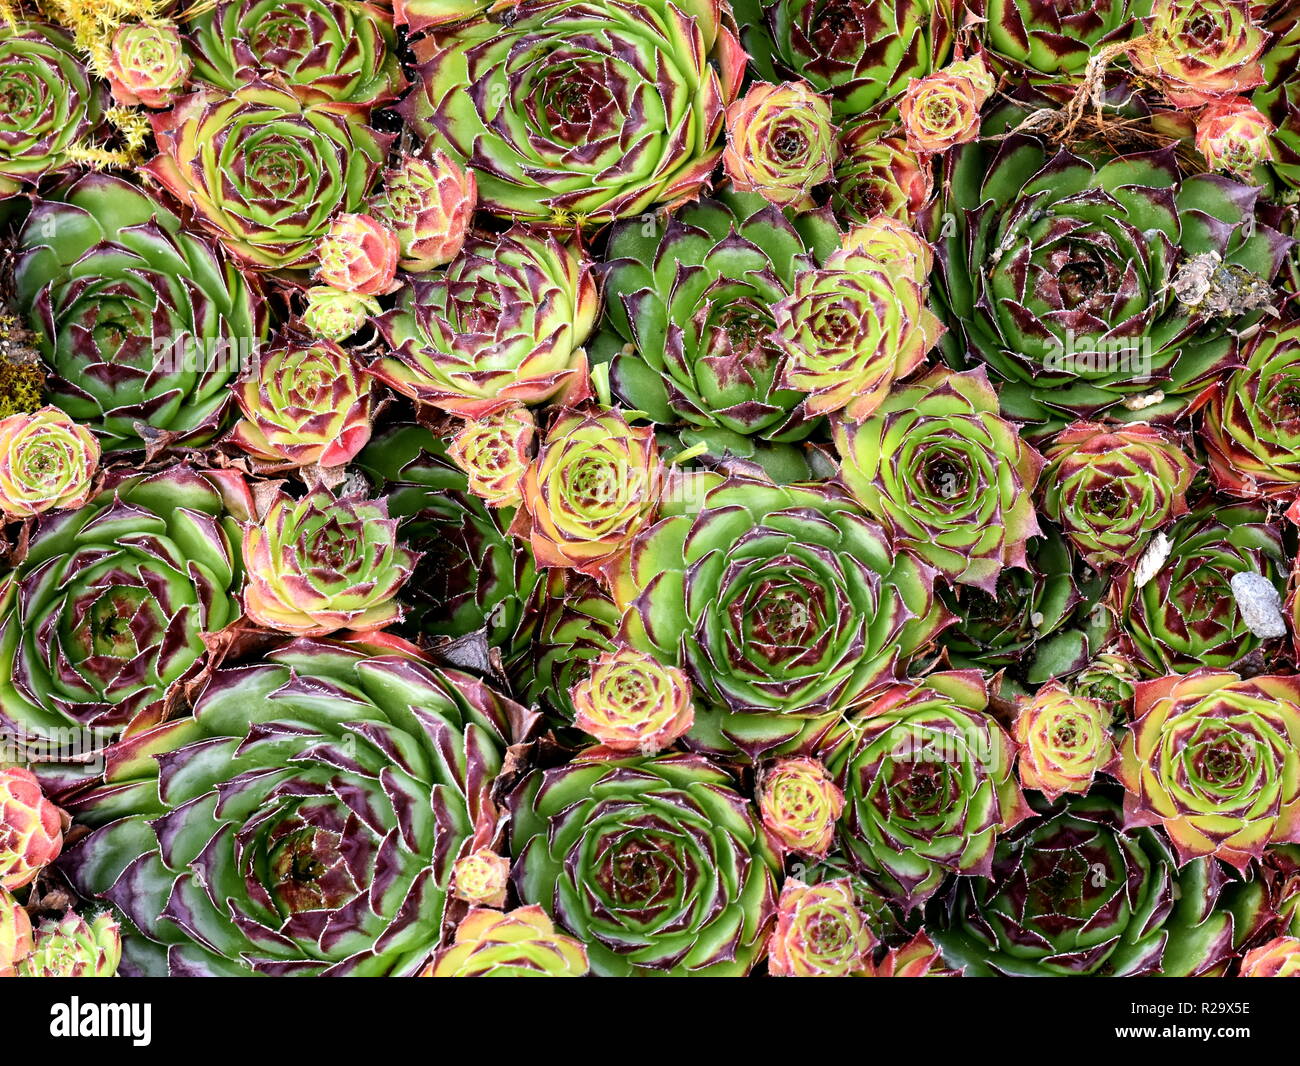 Rosettes of common house leek in different colors Stock Photo